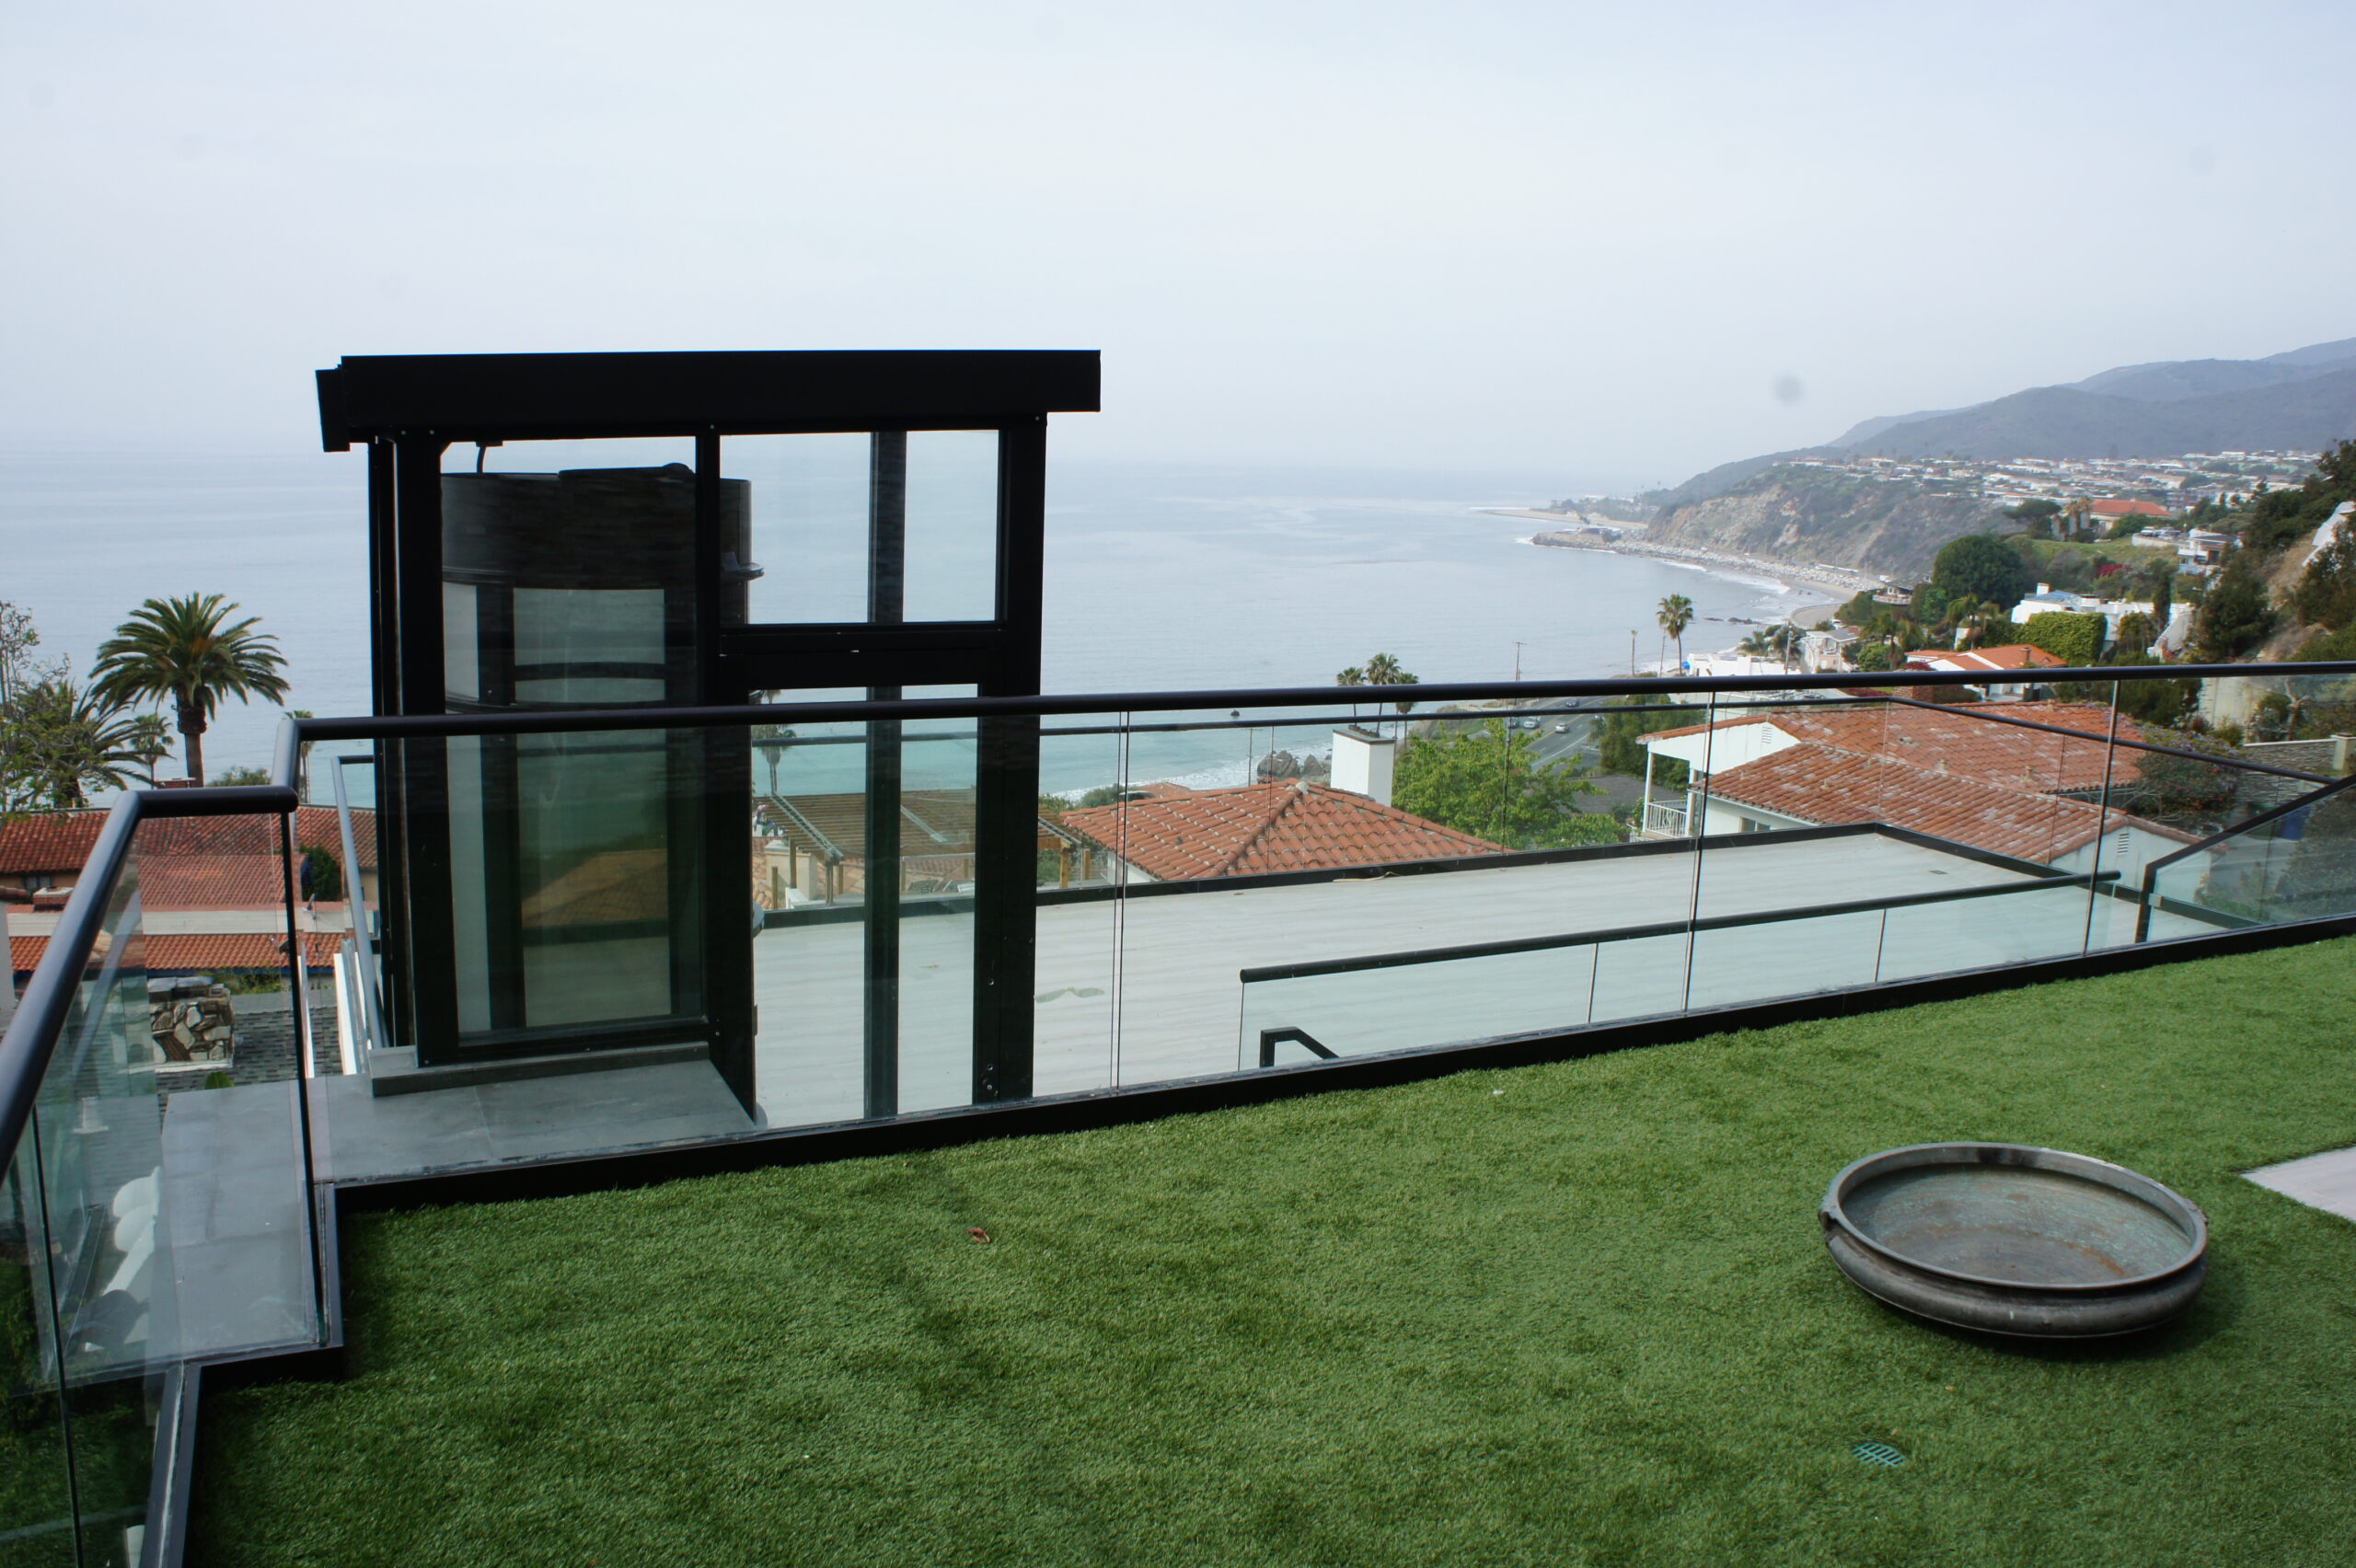 pve elevator installed in a glass enclosure on an outdoor stone deck overlooking the ocean